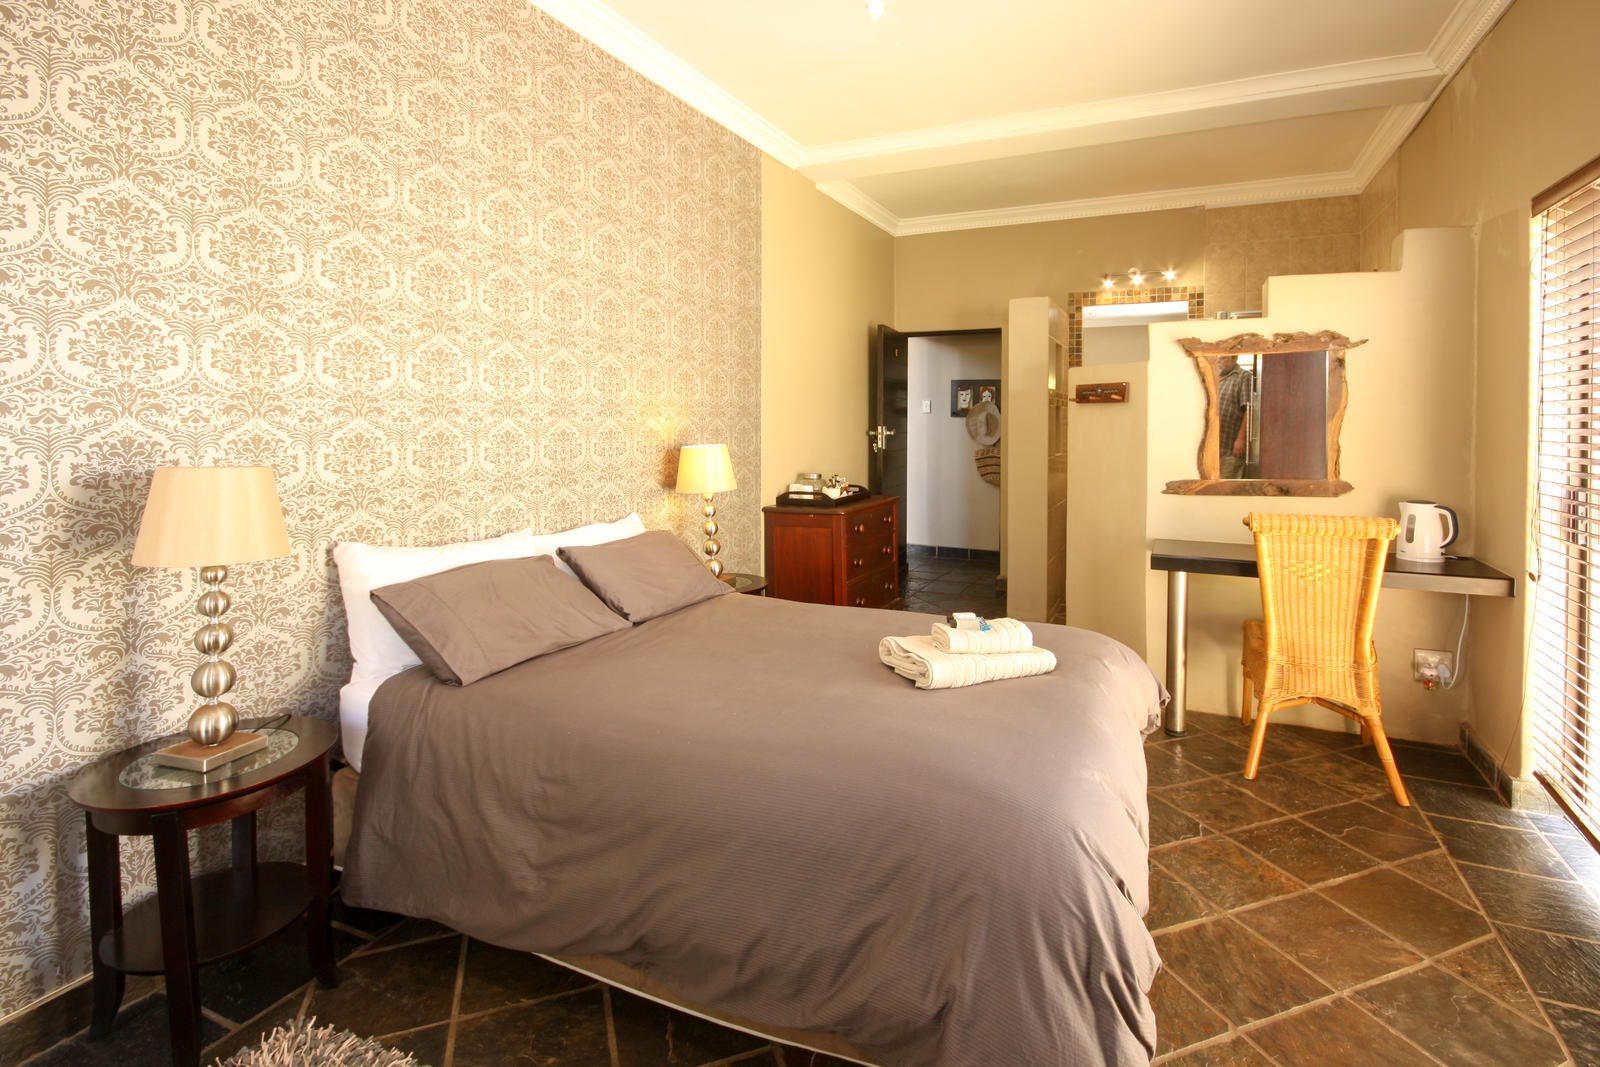 House Haven Guesthouse Bluewater Bay Port Elizabeth Eastern Cape South Africa Sepia Tones, Bedroom